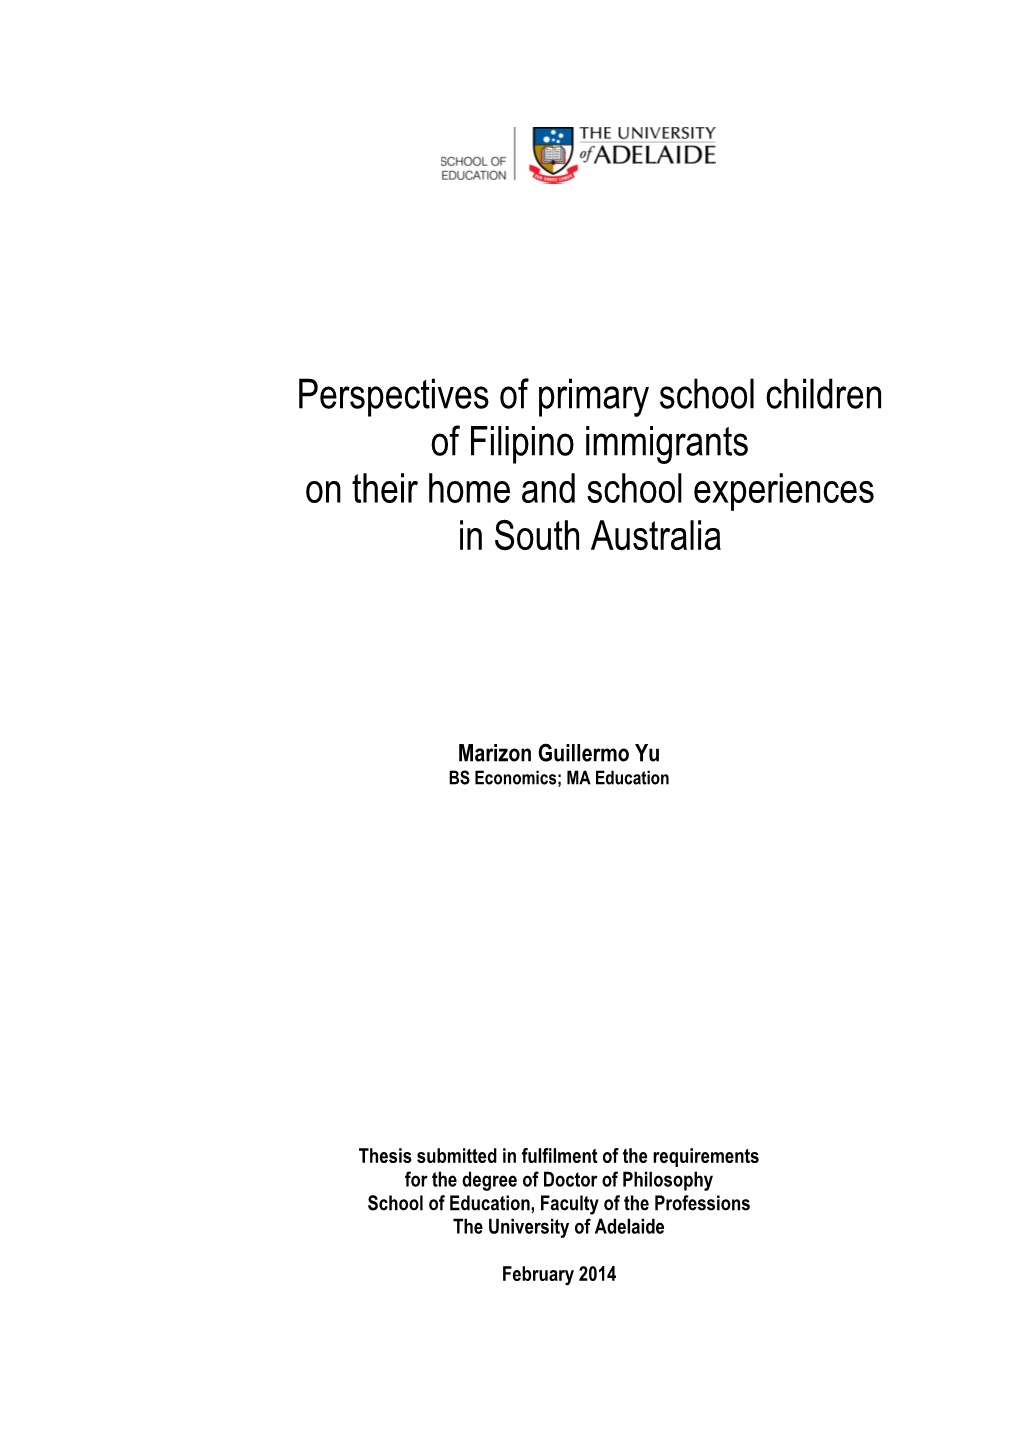 Perspectives of Primary School Children of Filipino Immigrants on Their Home and School Experiences in South Australia